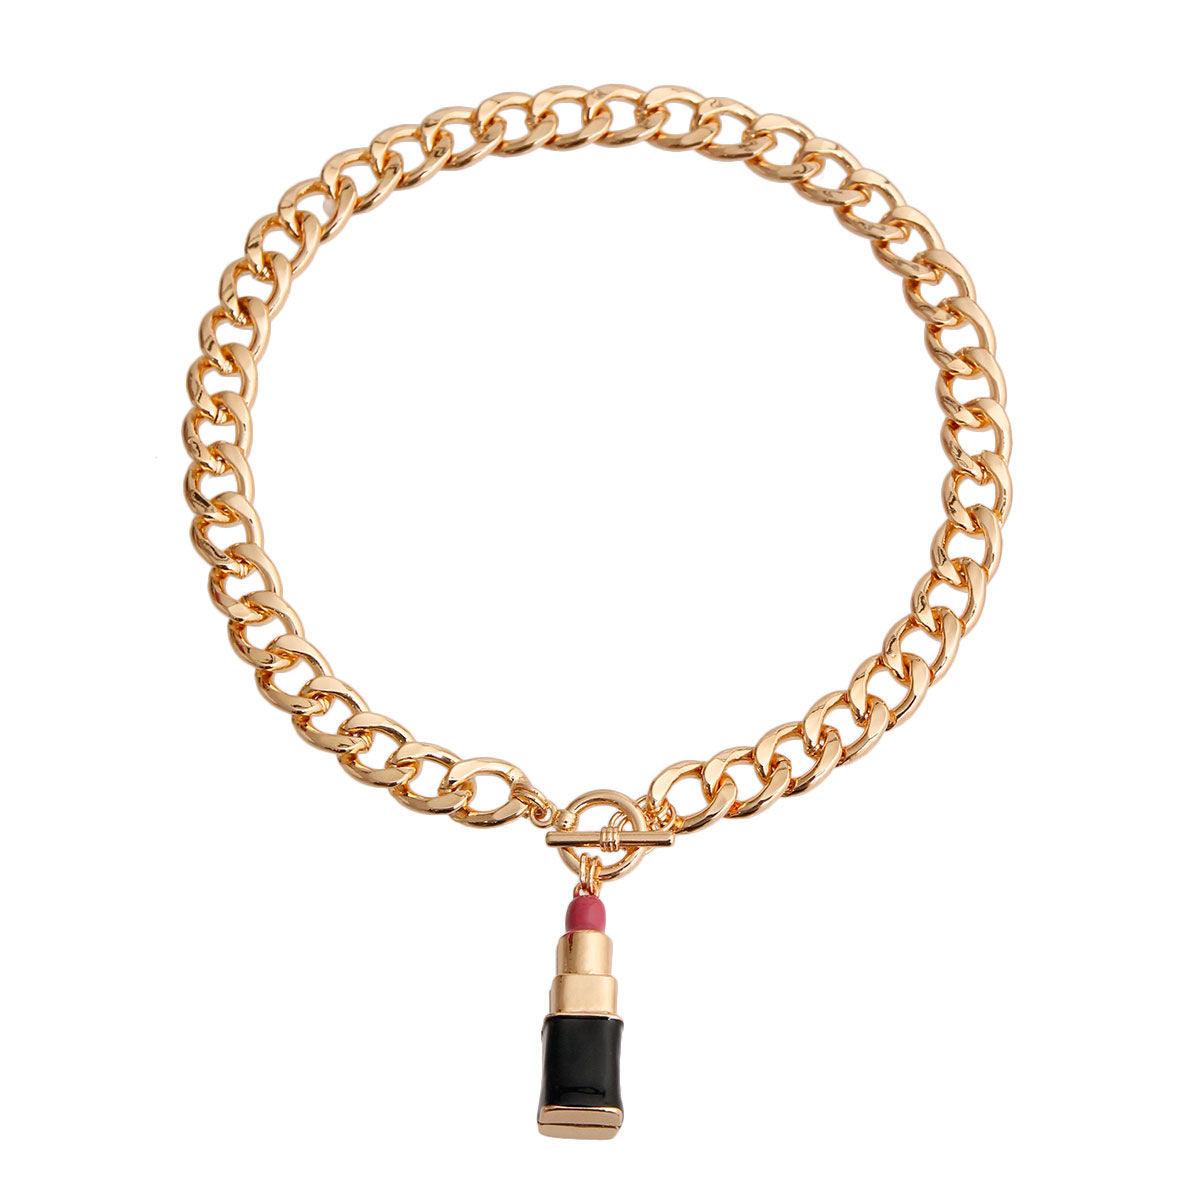 Get the Perfect Pink Lipstick Look with Our Gold Tone Chain Necklace